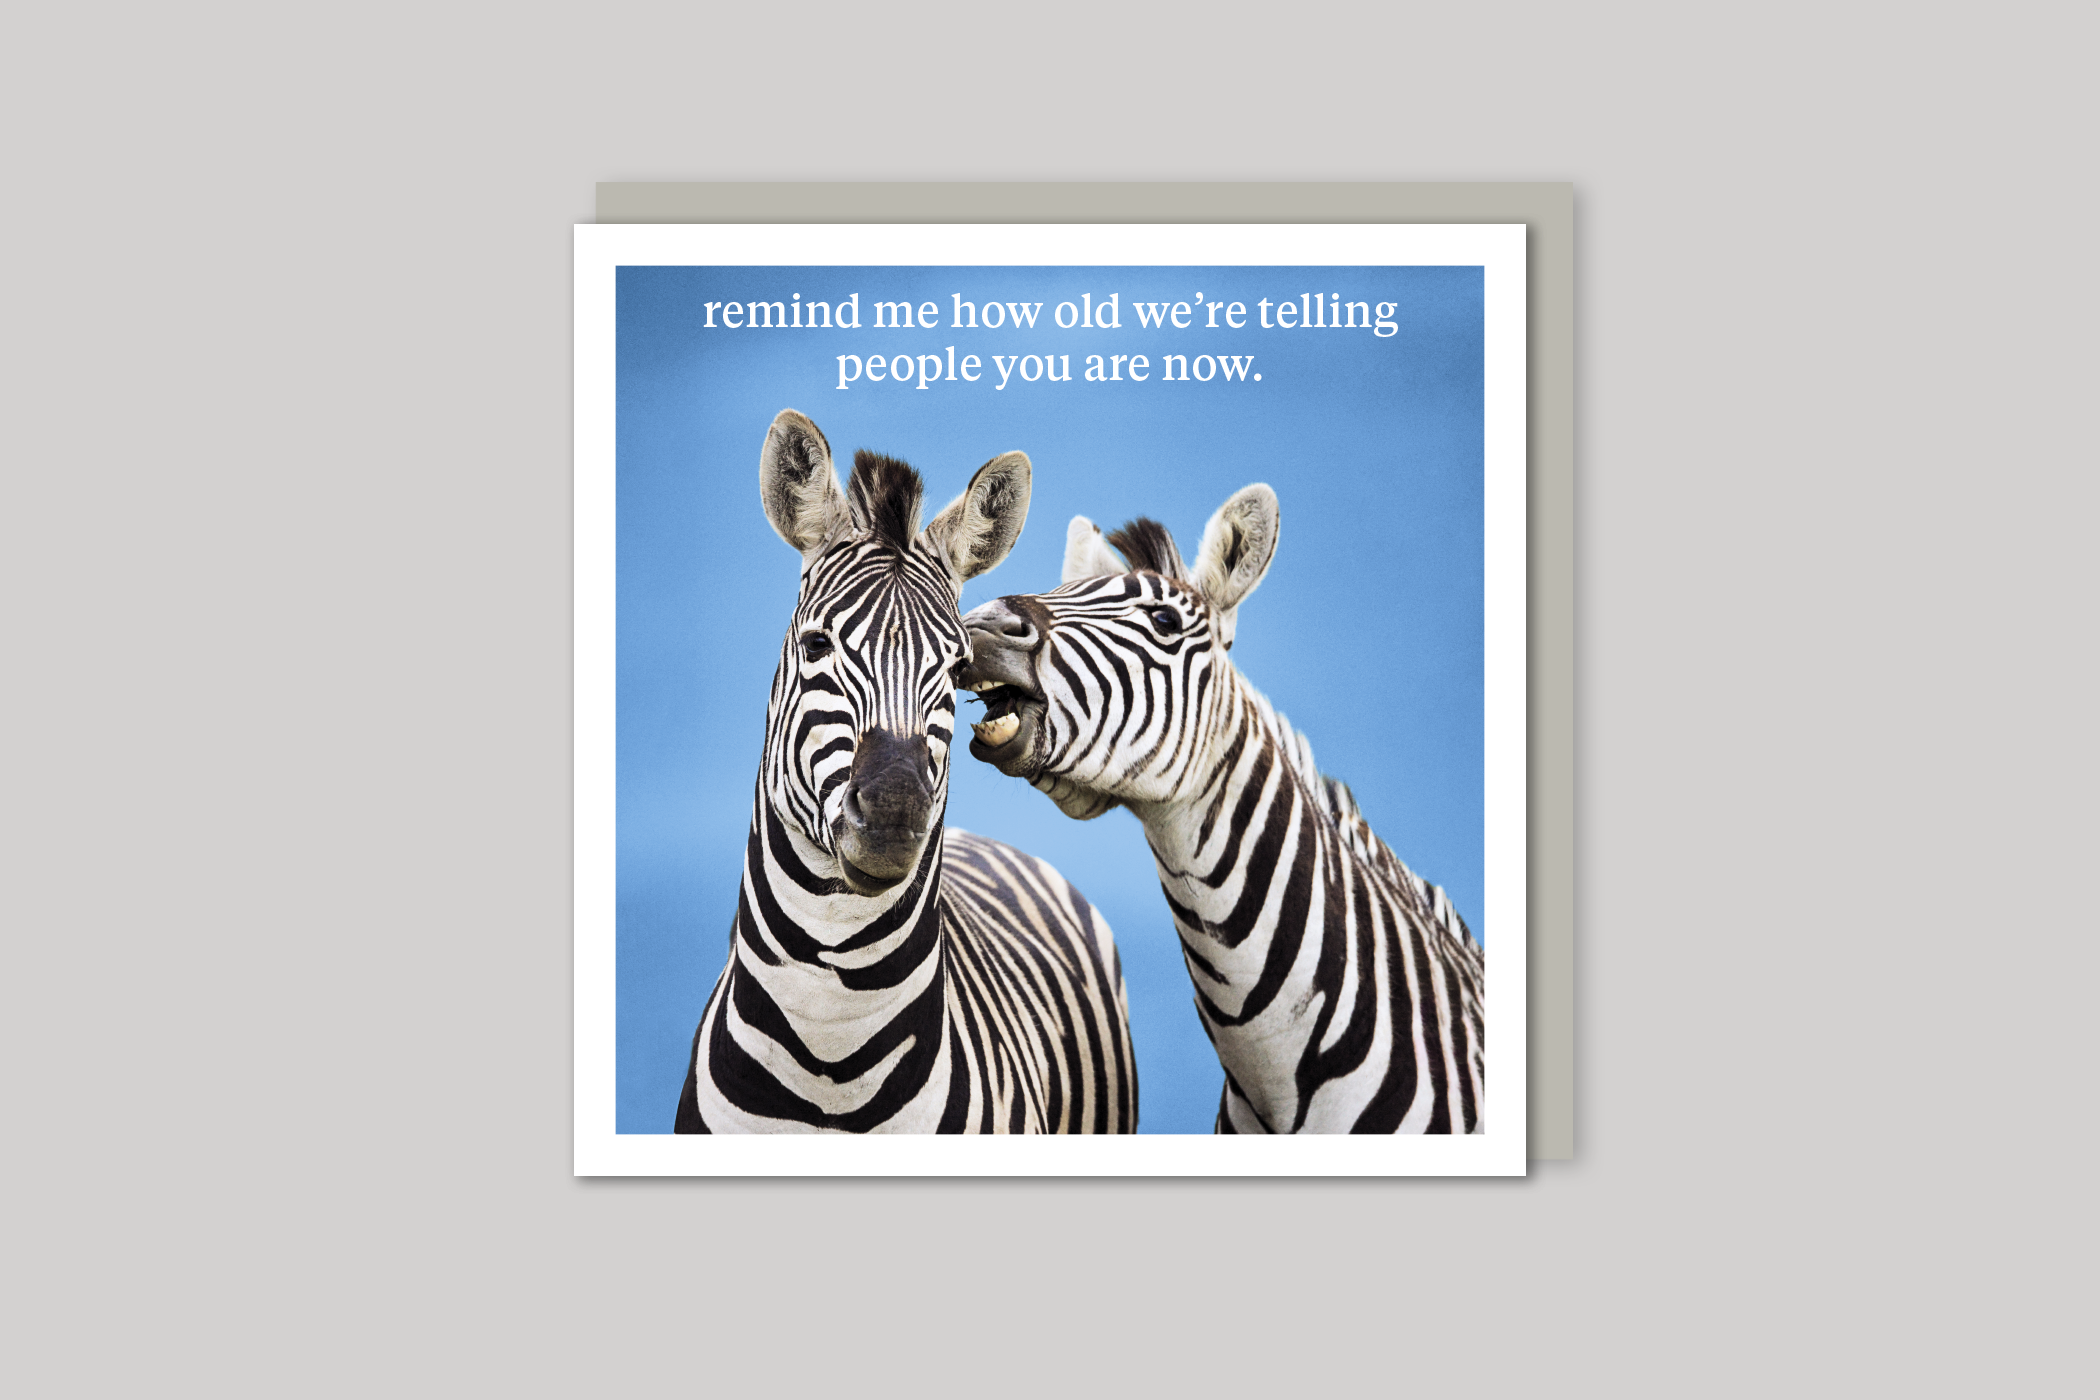 Remind Me quirky animal portrait from Curious World range of greeting cards by Icon, back page.